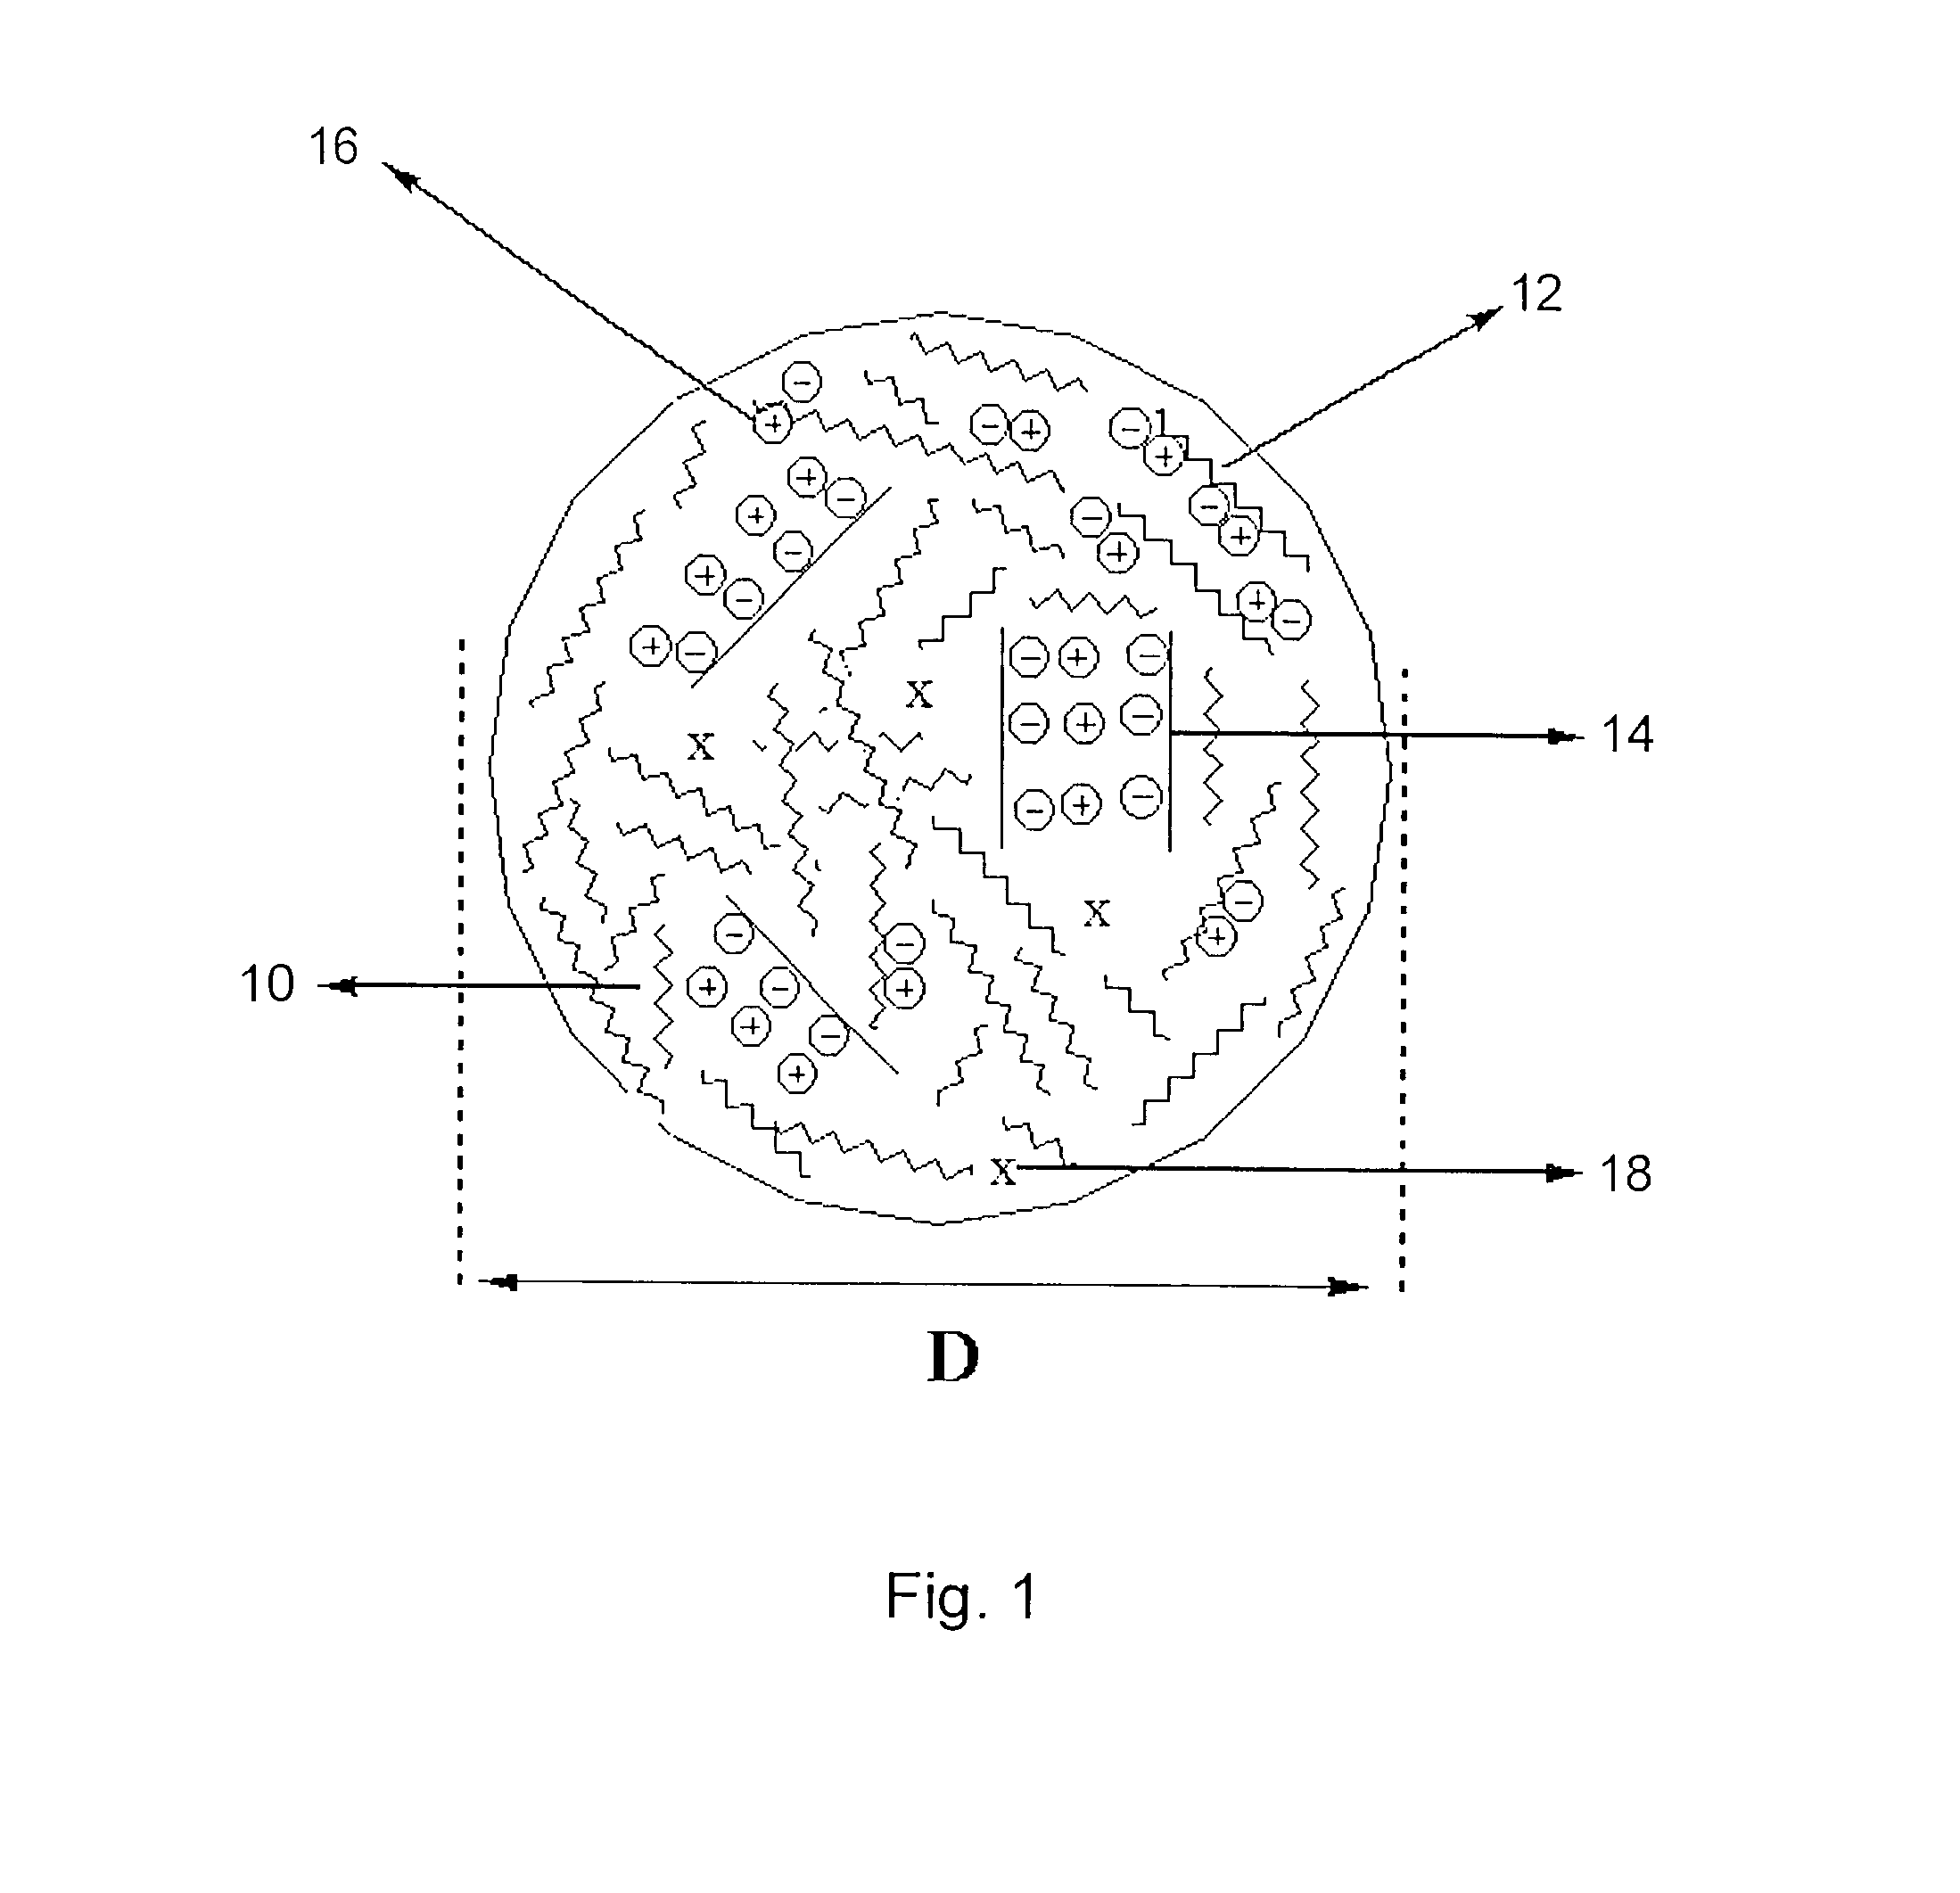 Composite animal litter material and methods